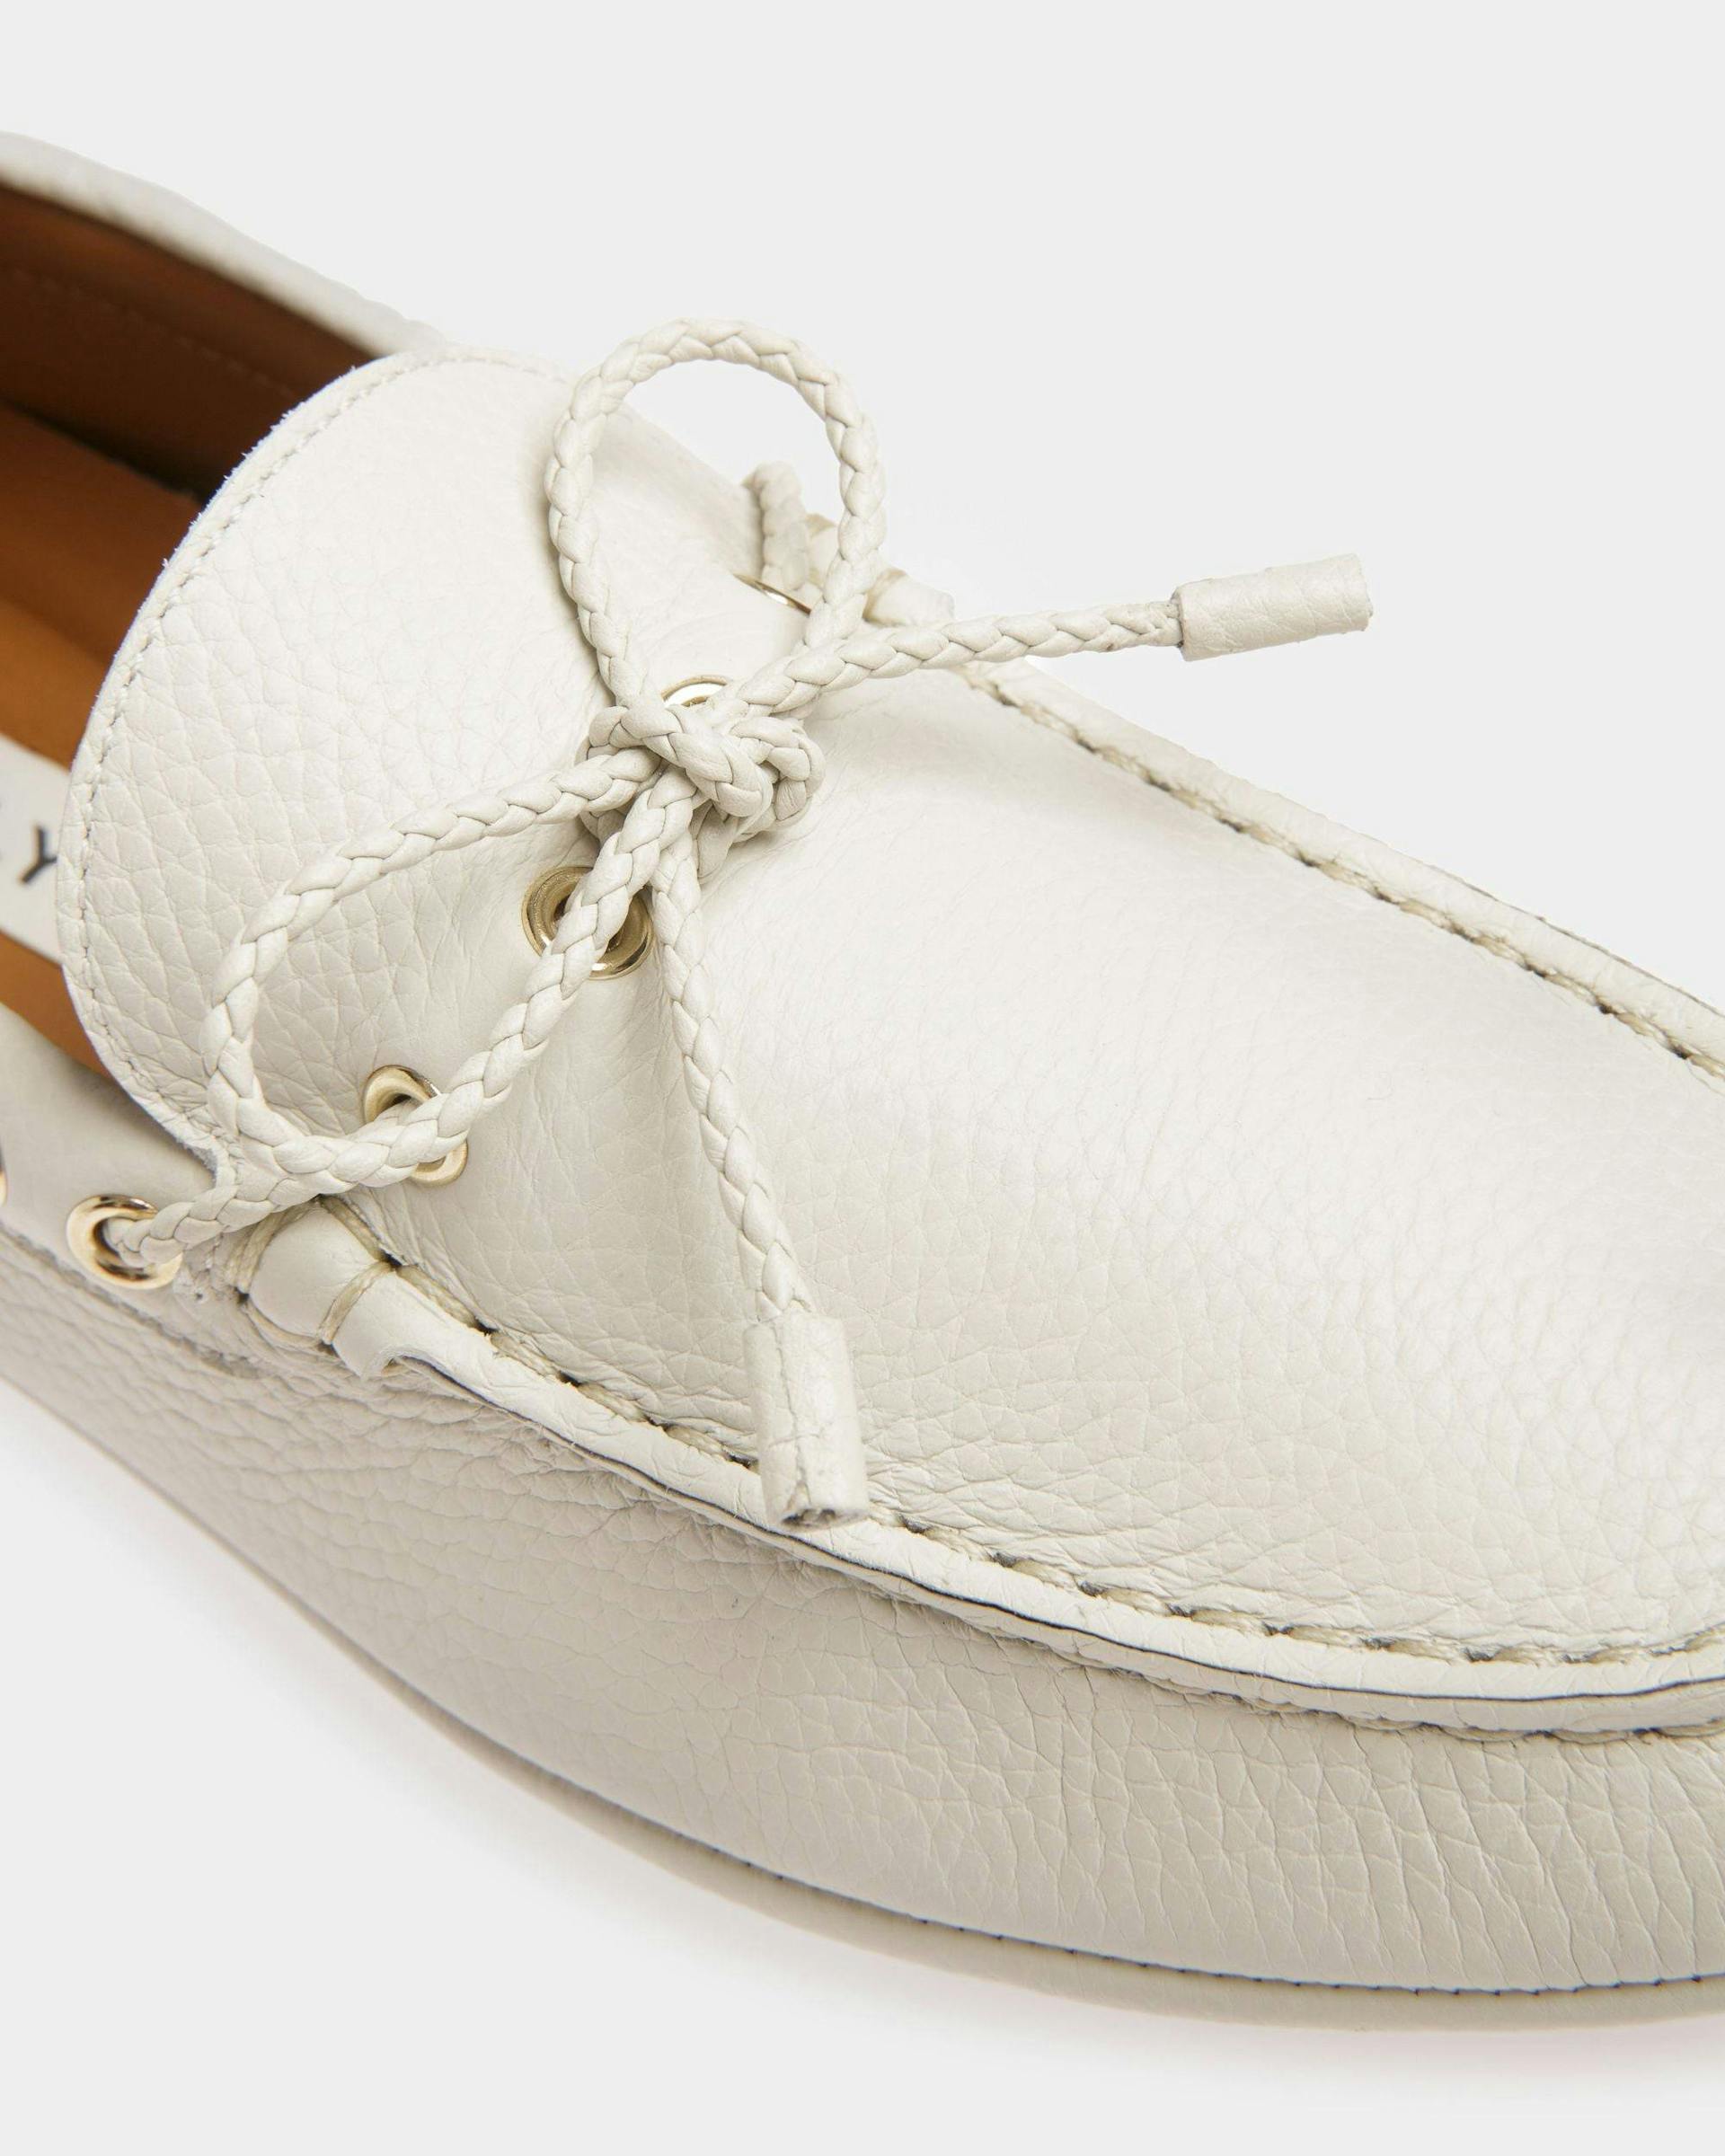 Women's Kerbs Drivers In Dusty White Leather | Bally | Still Life Detail